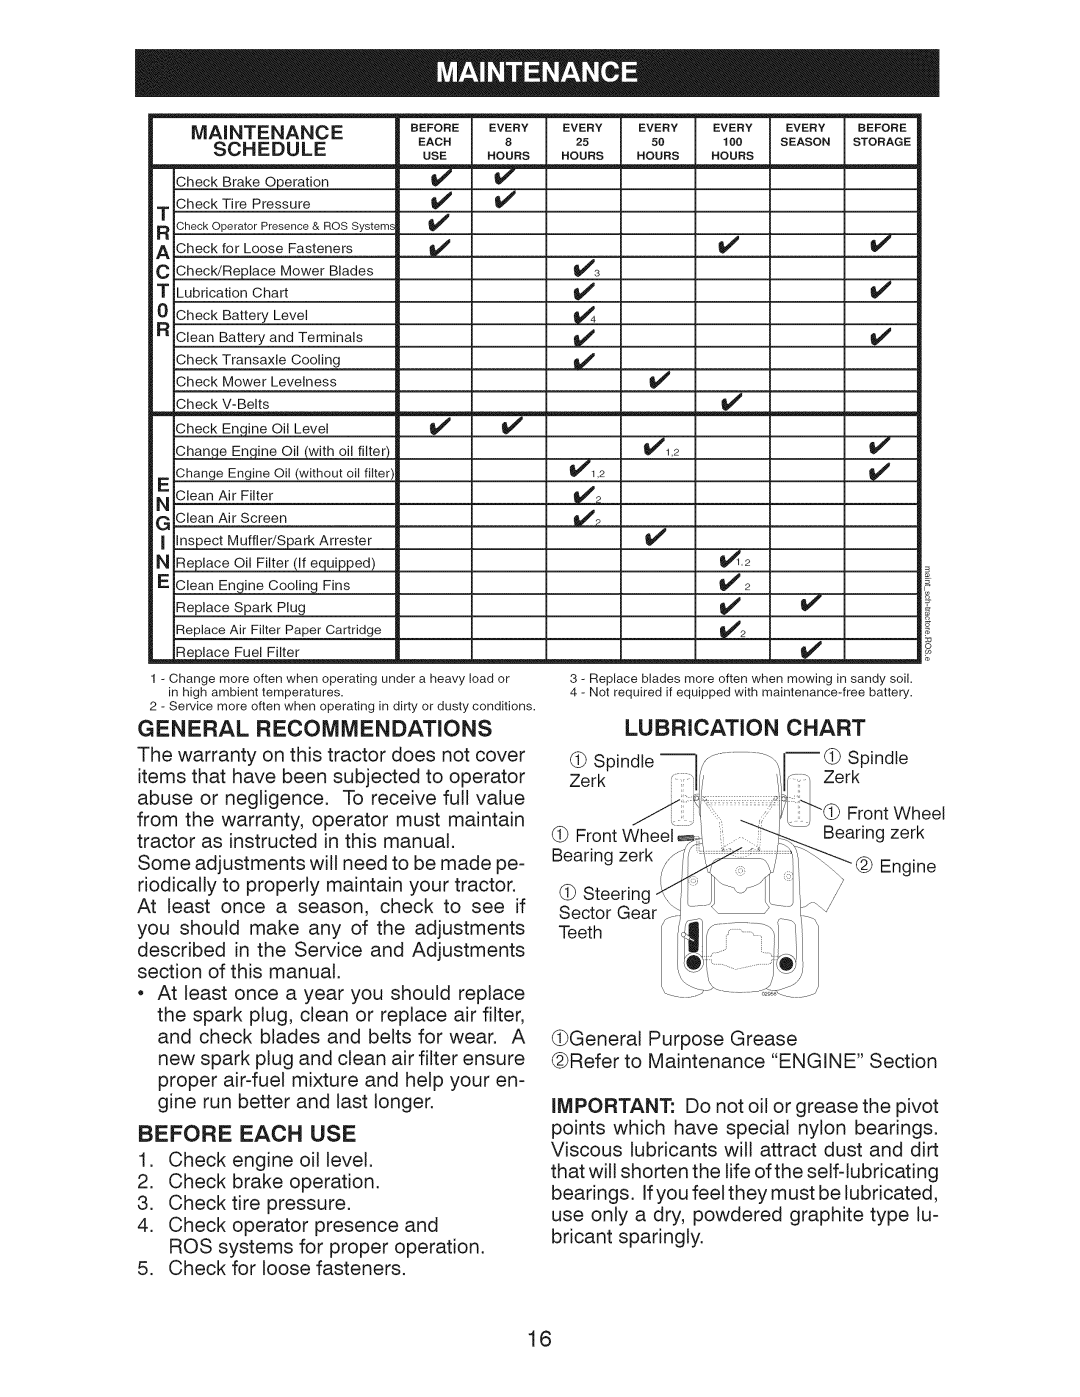 Craftsman 917.289240 owner manual General Recommendations, Before Each Use, Lubrication, Chart, v 